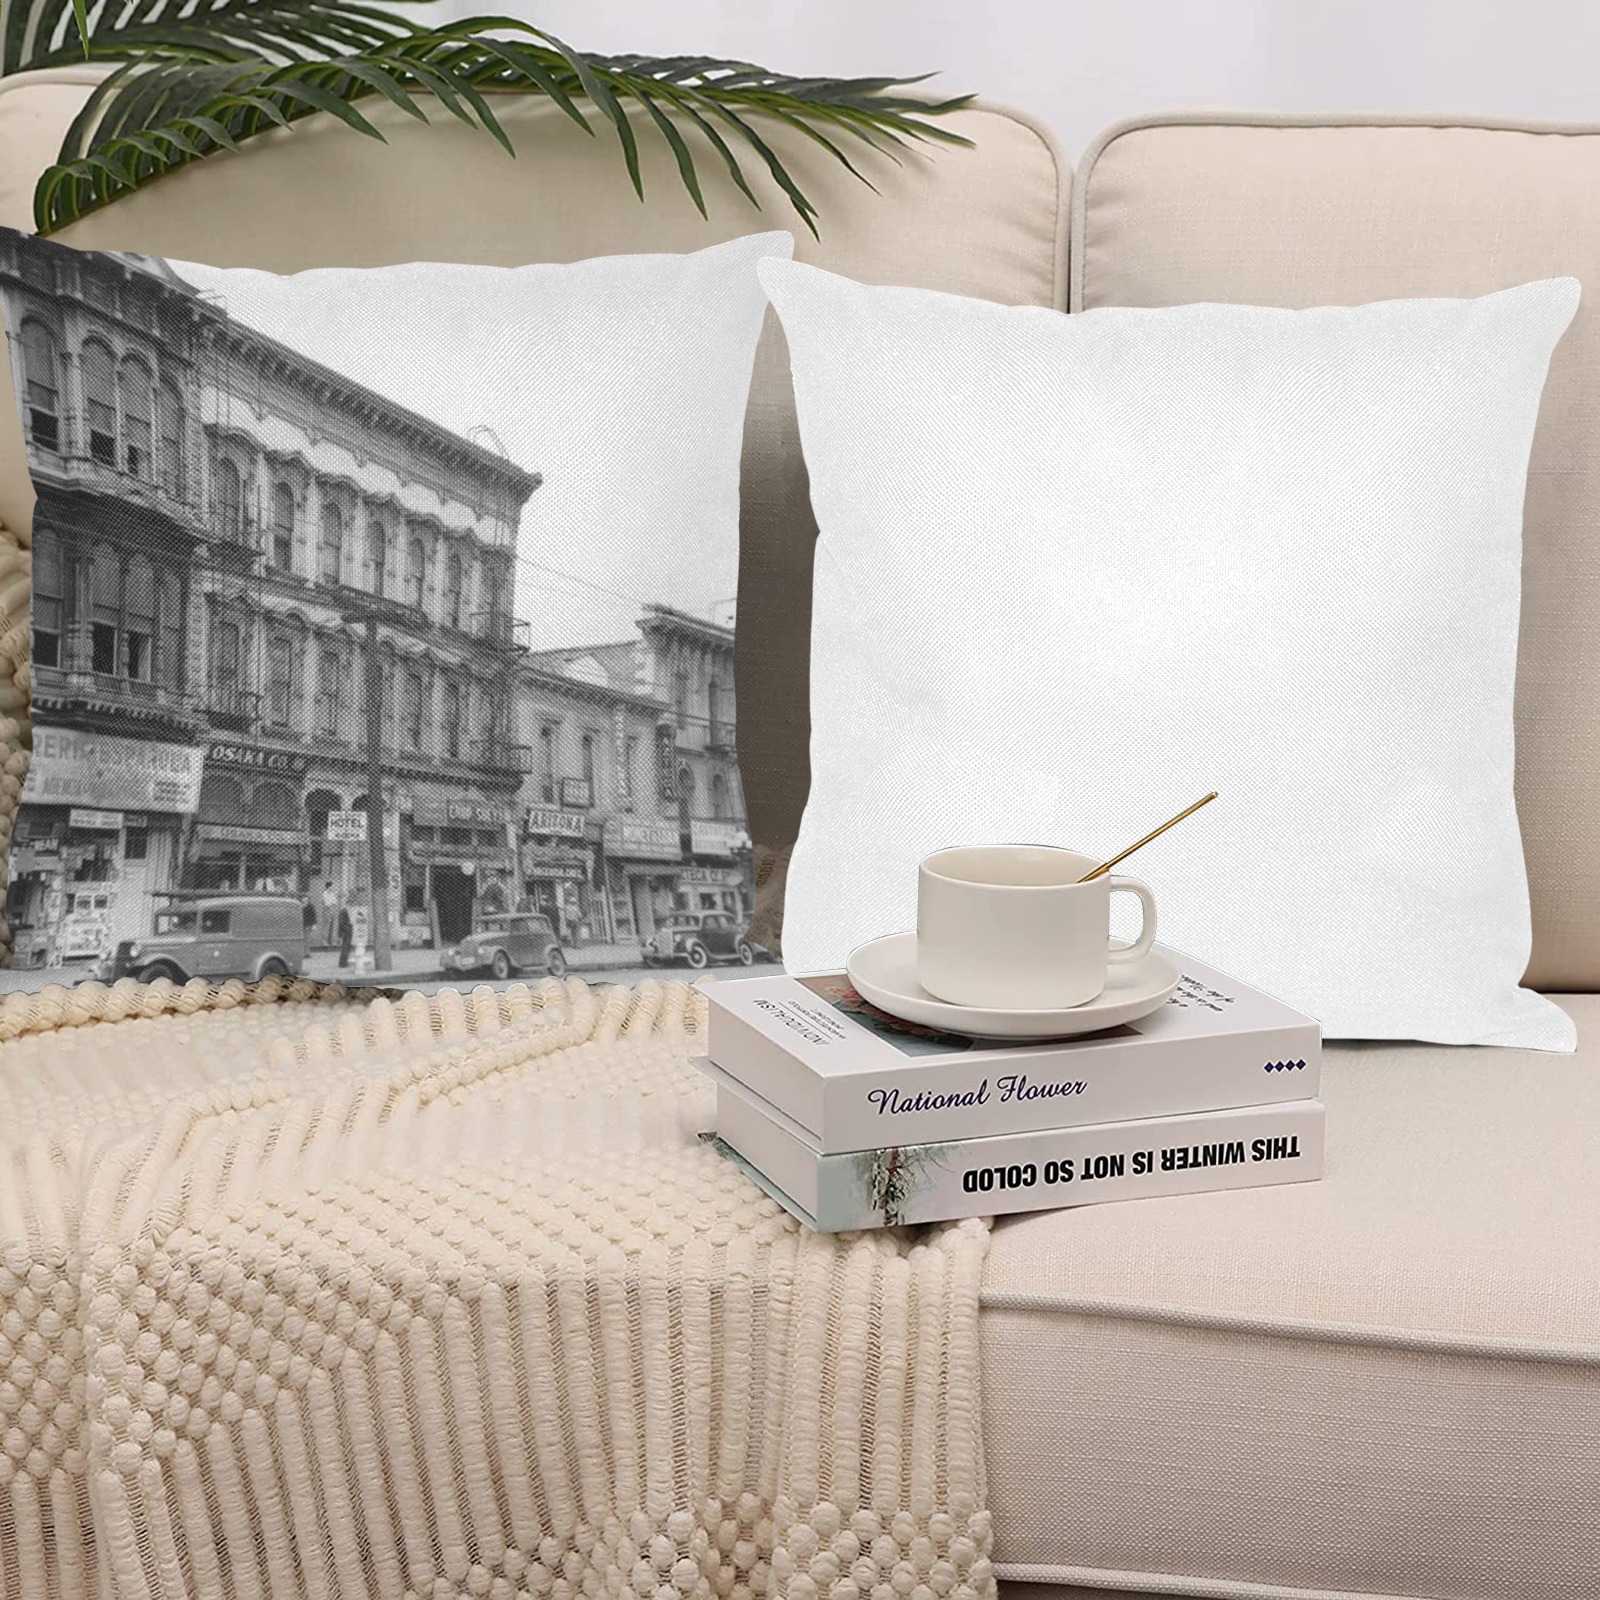 East side of Main Street Los Angeles. 1930s Linen Zippered Pillowcase 18"x18"(One Side&Pack of 2)